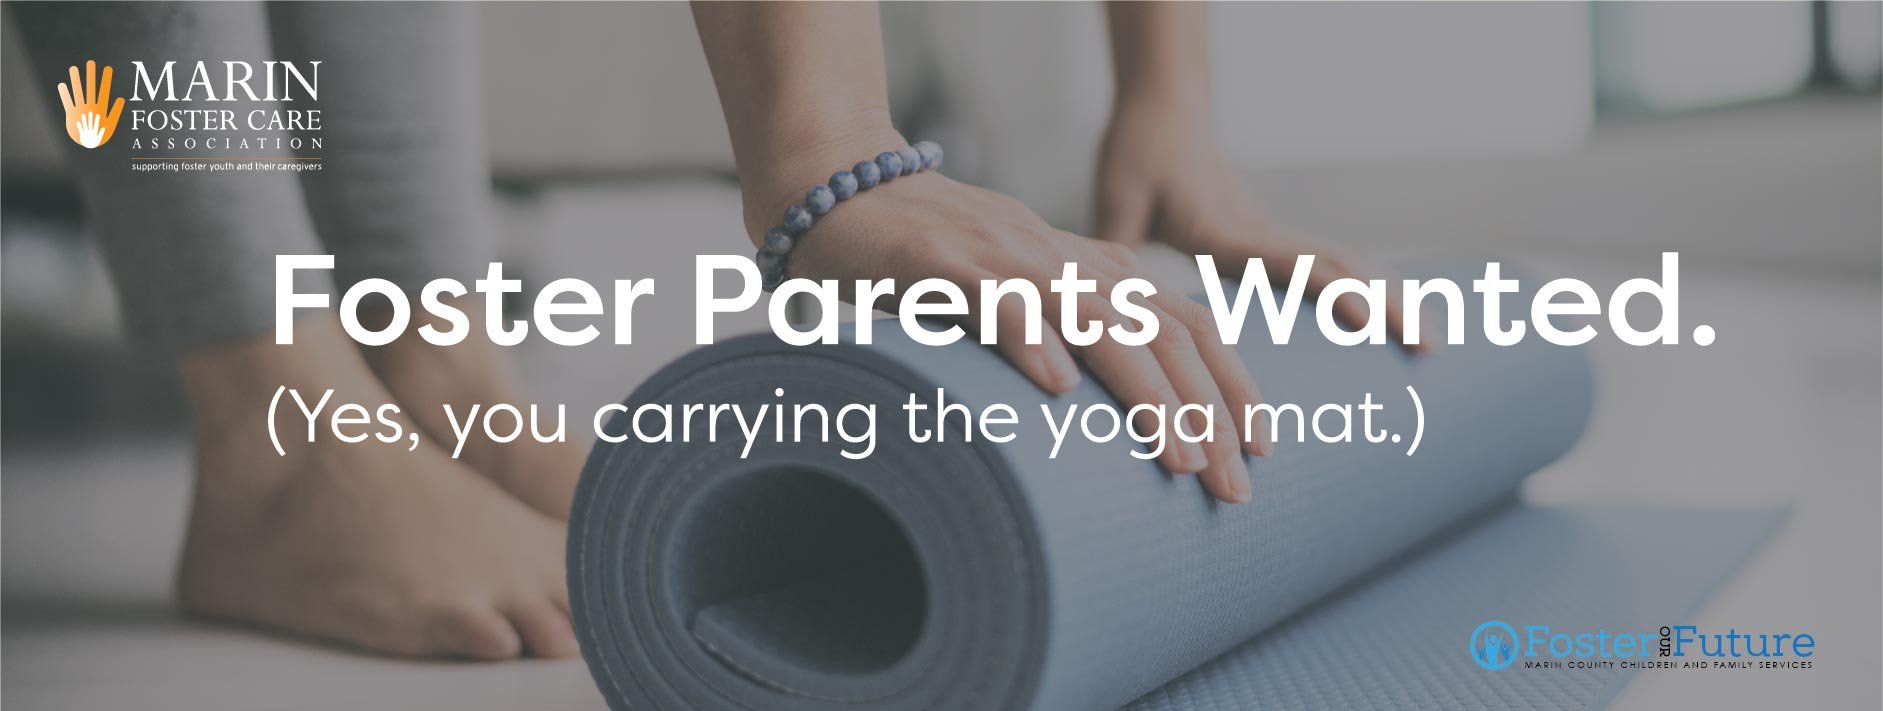 FosterParentsWanted-Yoga-sml.jpg